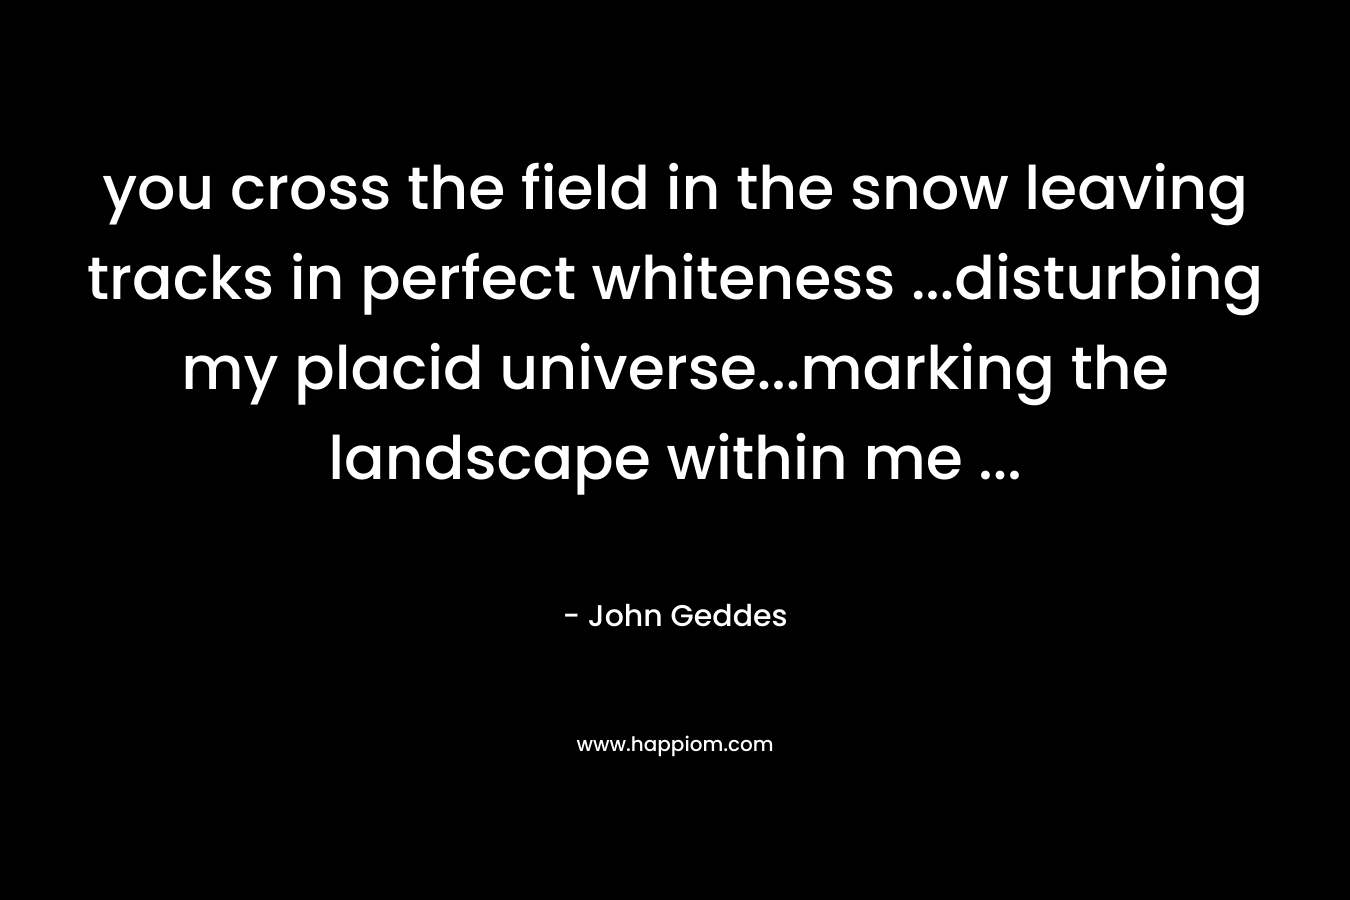 you cross the field in the snow leaving tracks in perfect whiteness ...disturbing my placid universe...marking the landscape within me ...